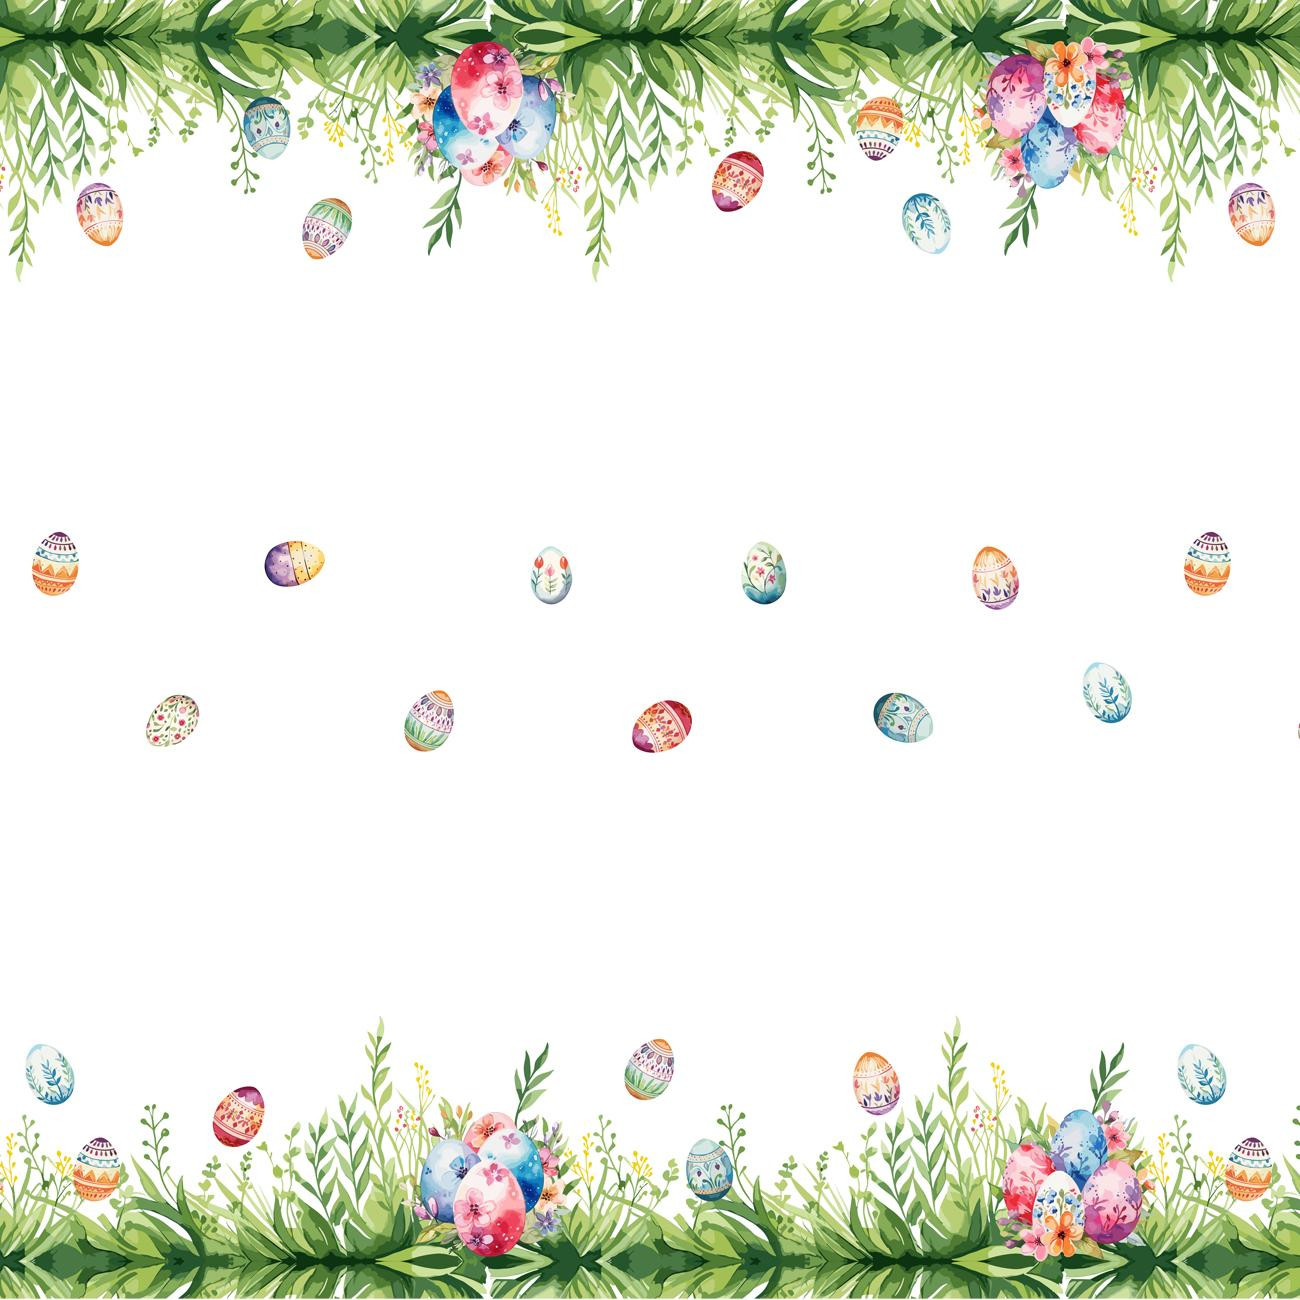 EASTER EGGS - Woven Fabric for tablecloths